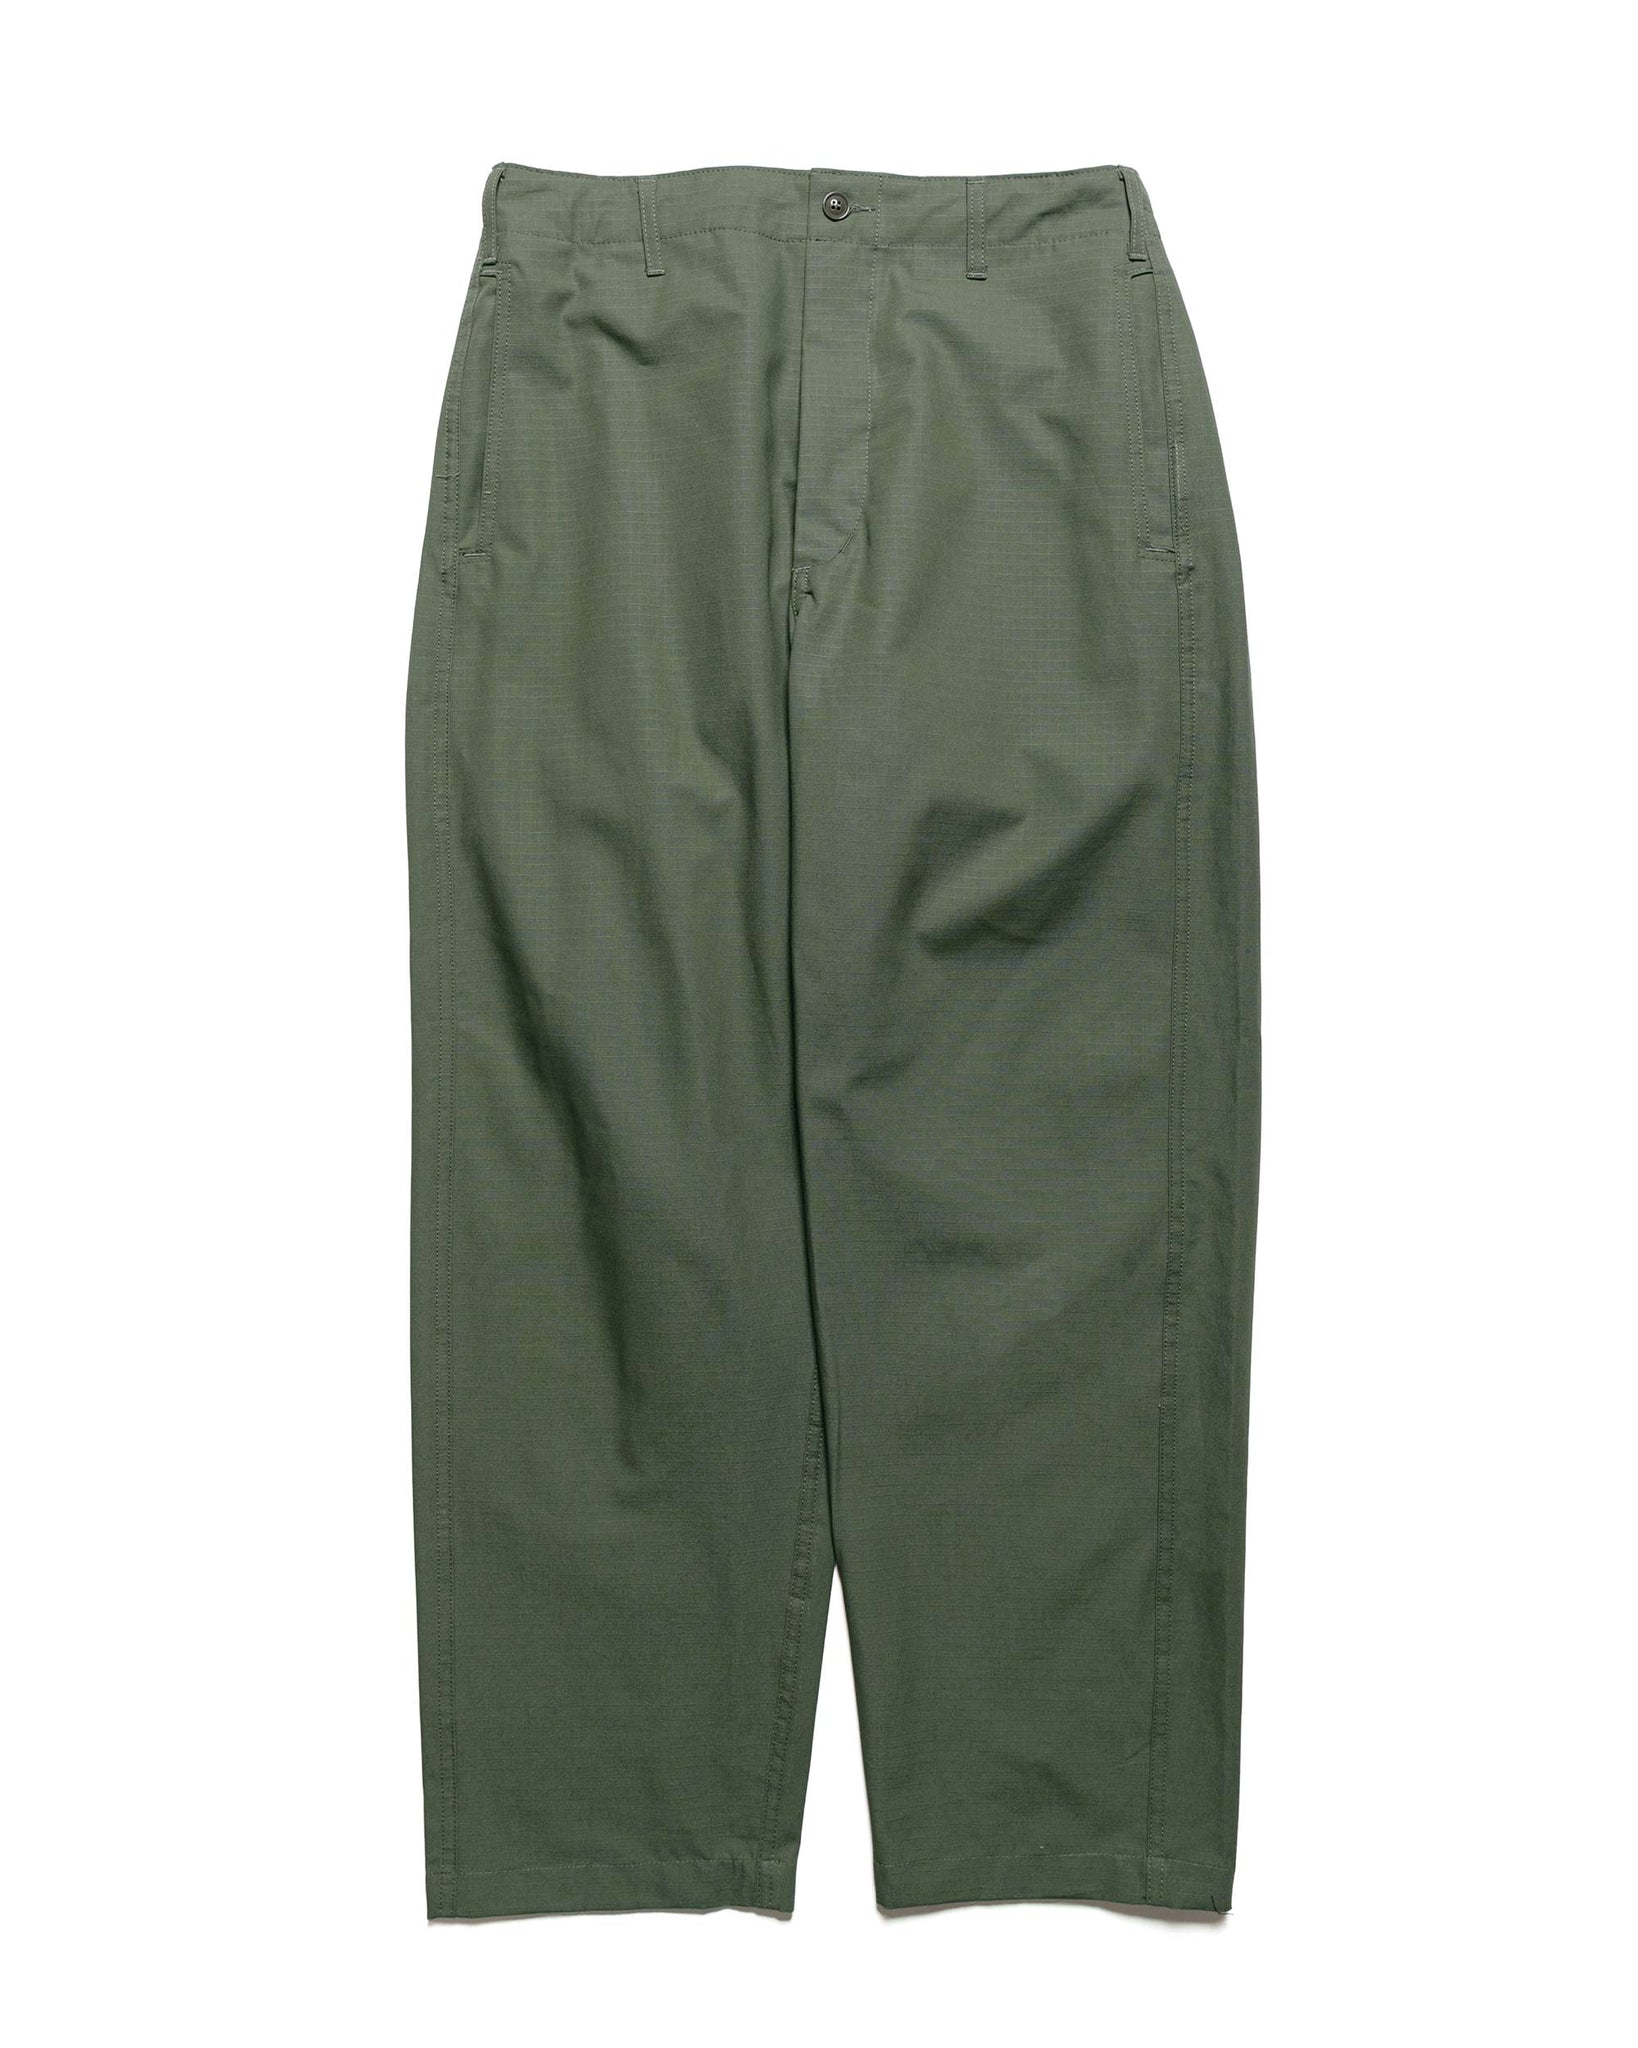 Engineered Garments Workaday Utility Pant Olive Cotton Ripstop